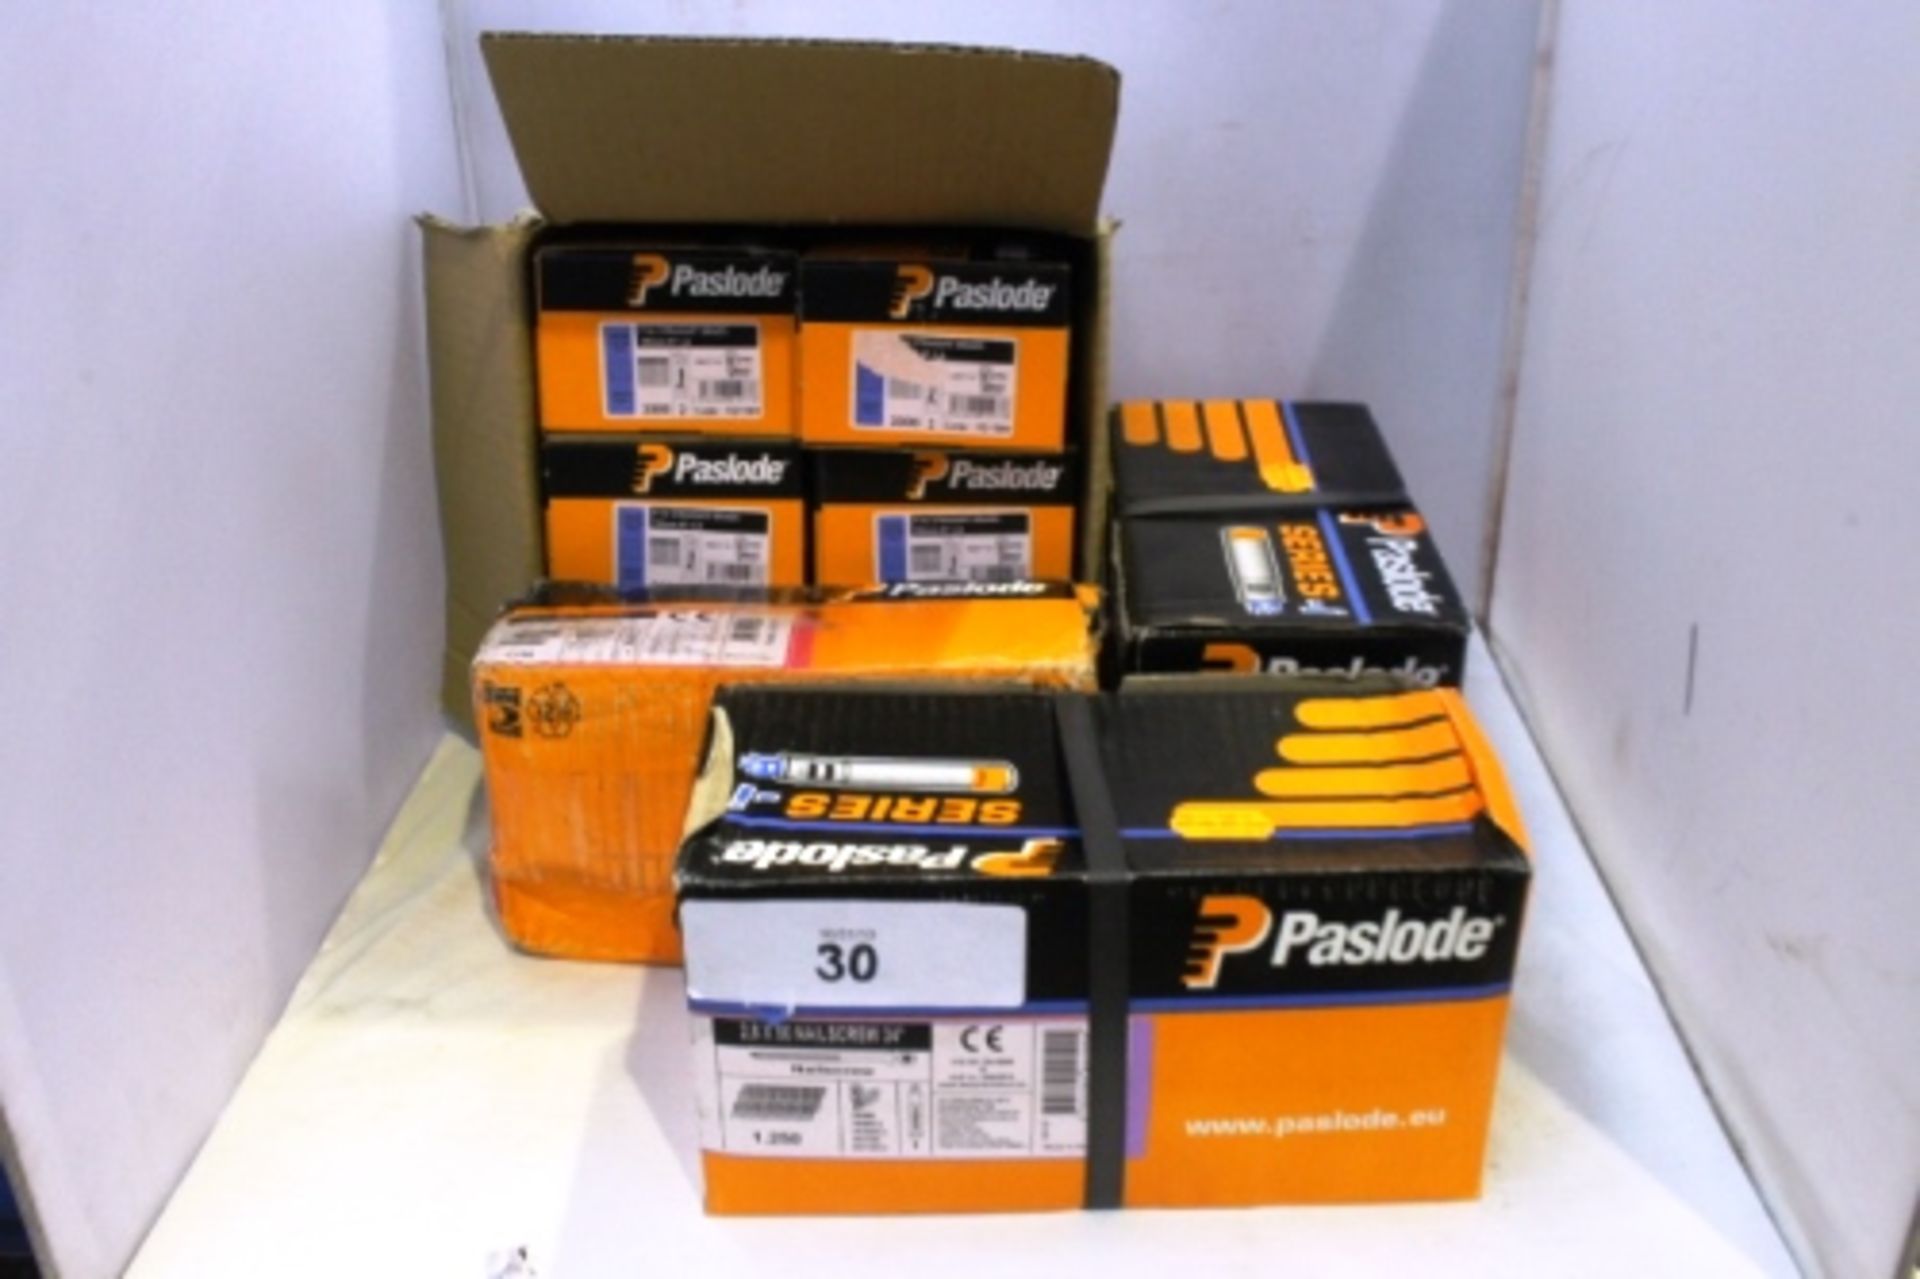 2 x boxes of Paslode 2.8 x 50mm nailscrew, 34 degree and 1 gas canister 142100 together with 1 x box